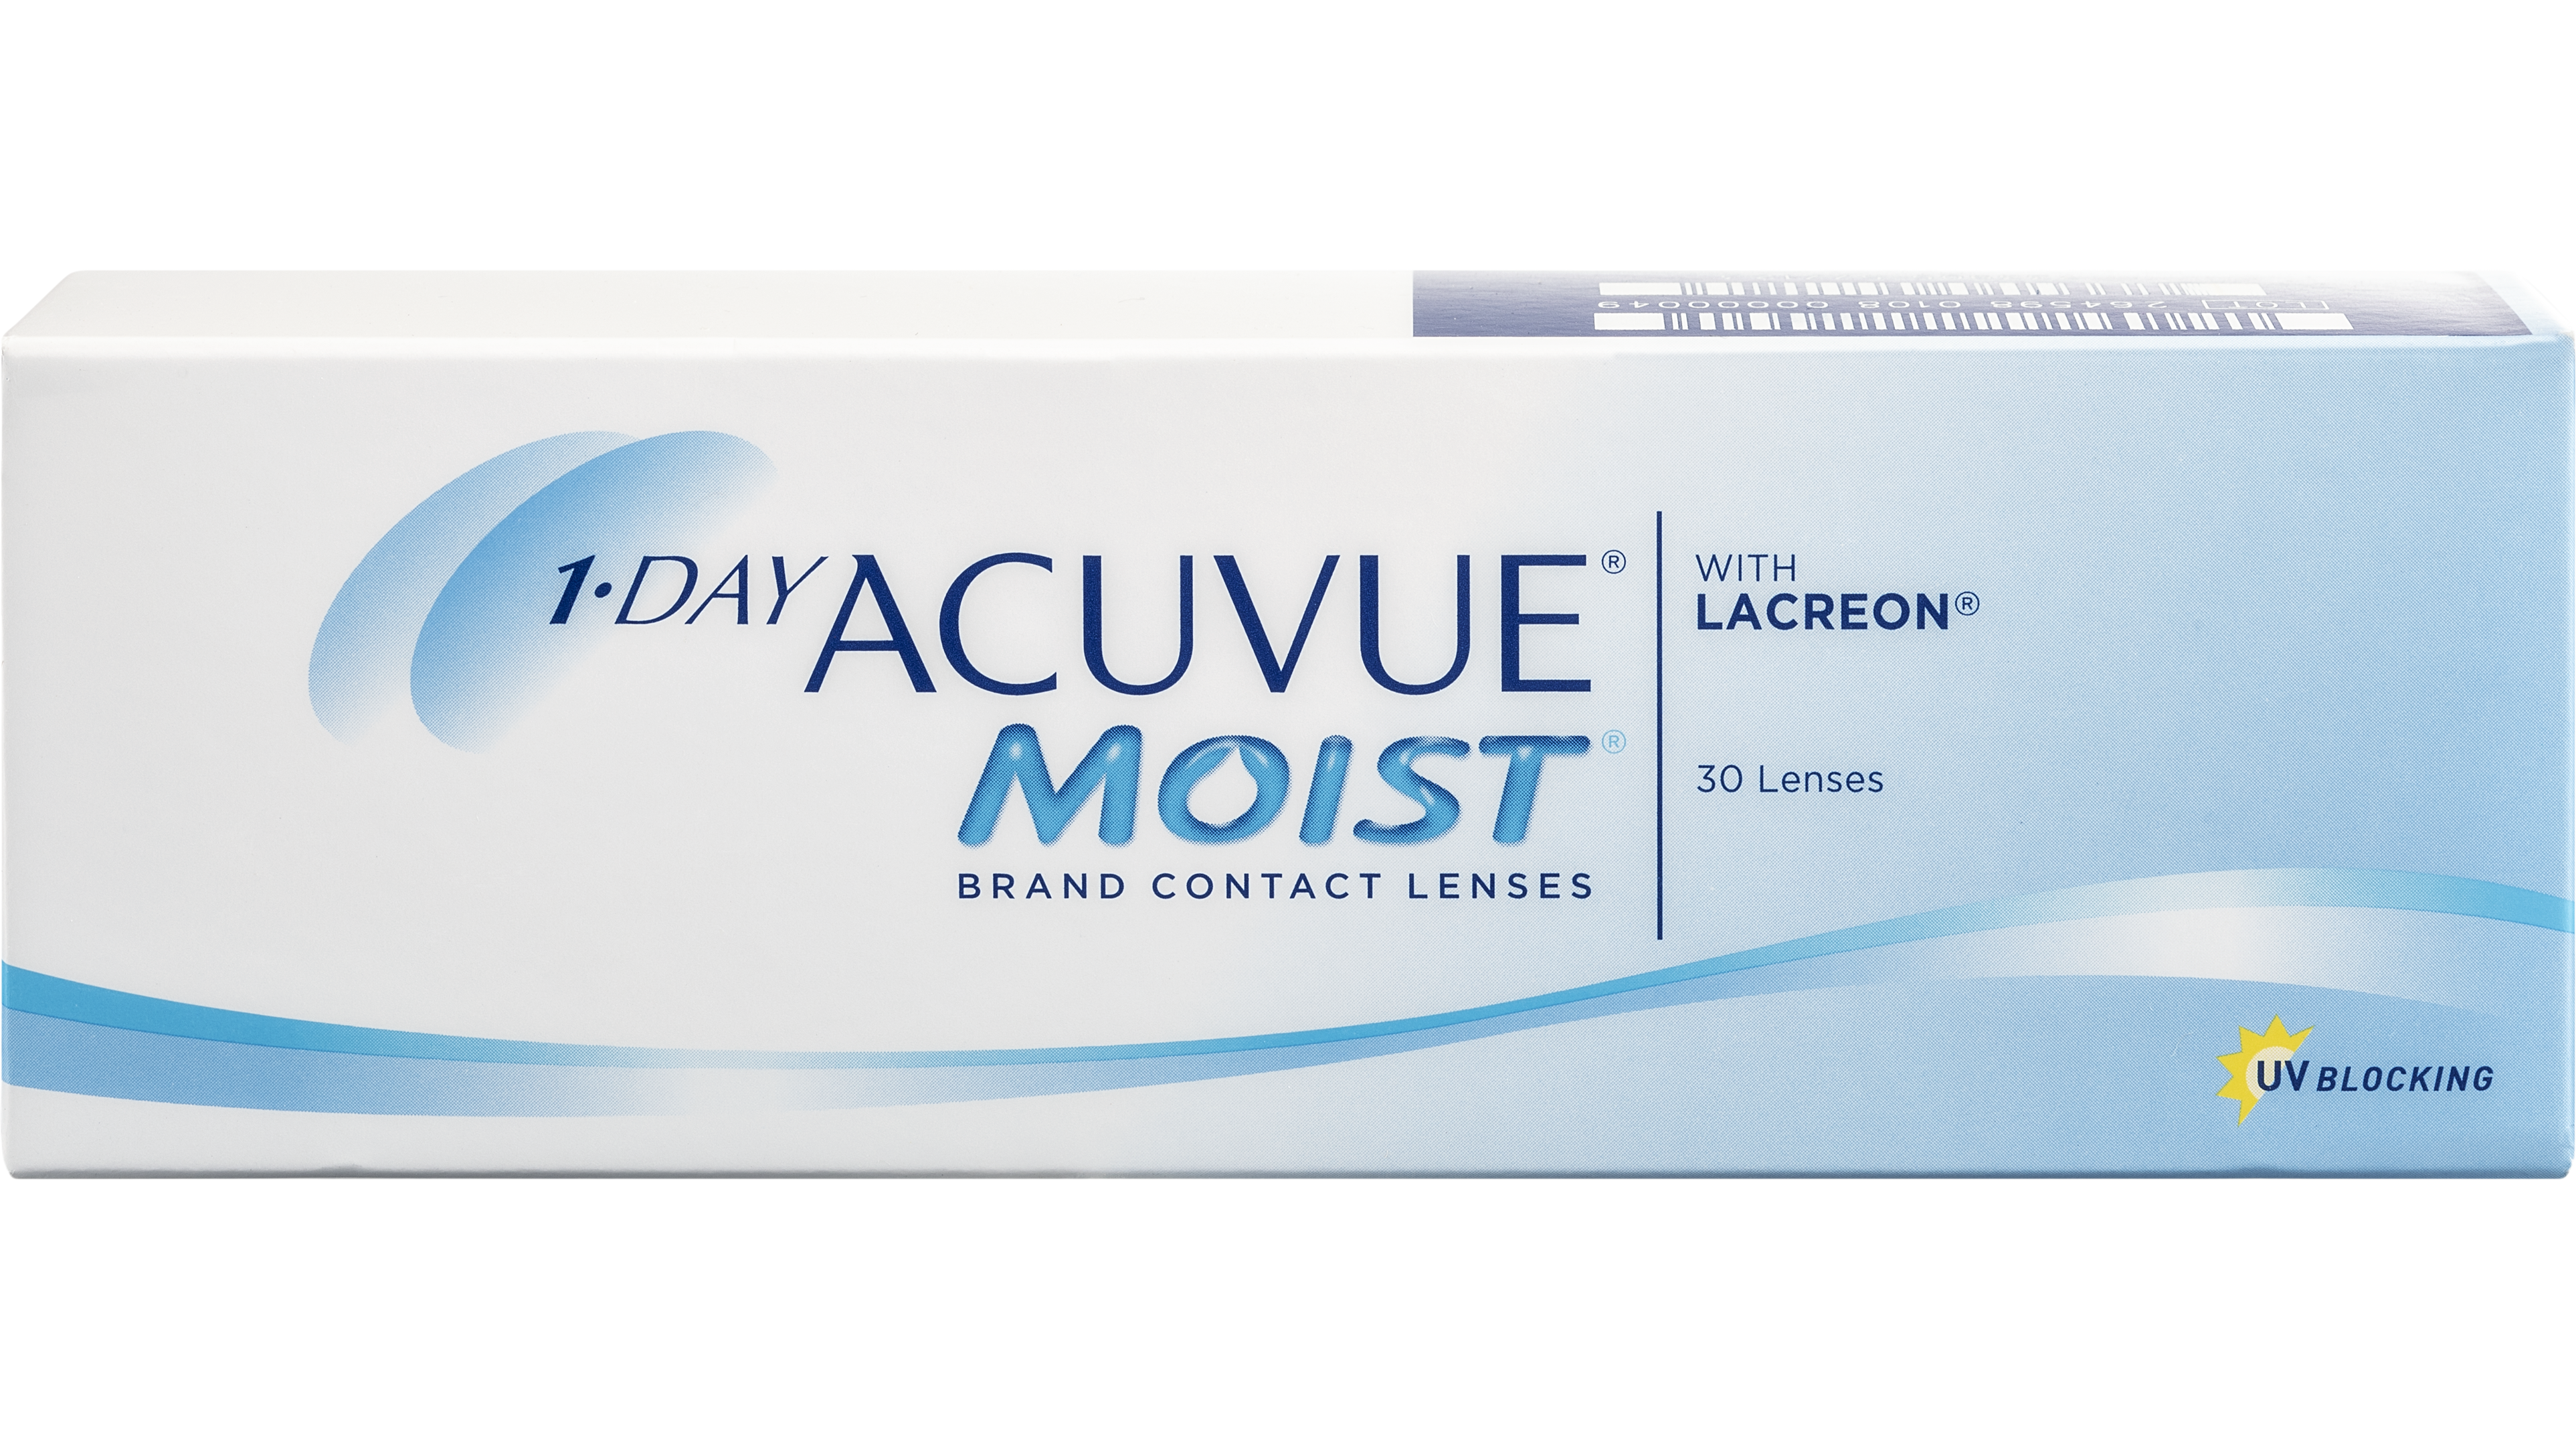 Front 1 Day Acuvue Moist